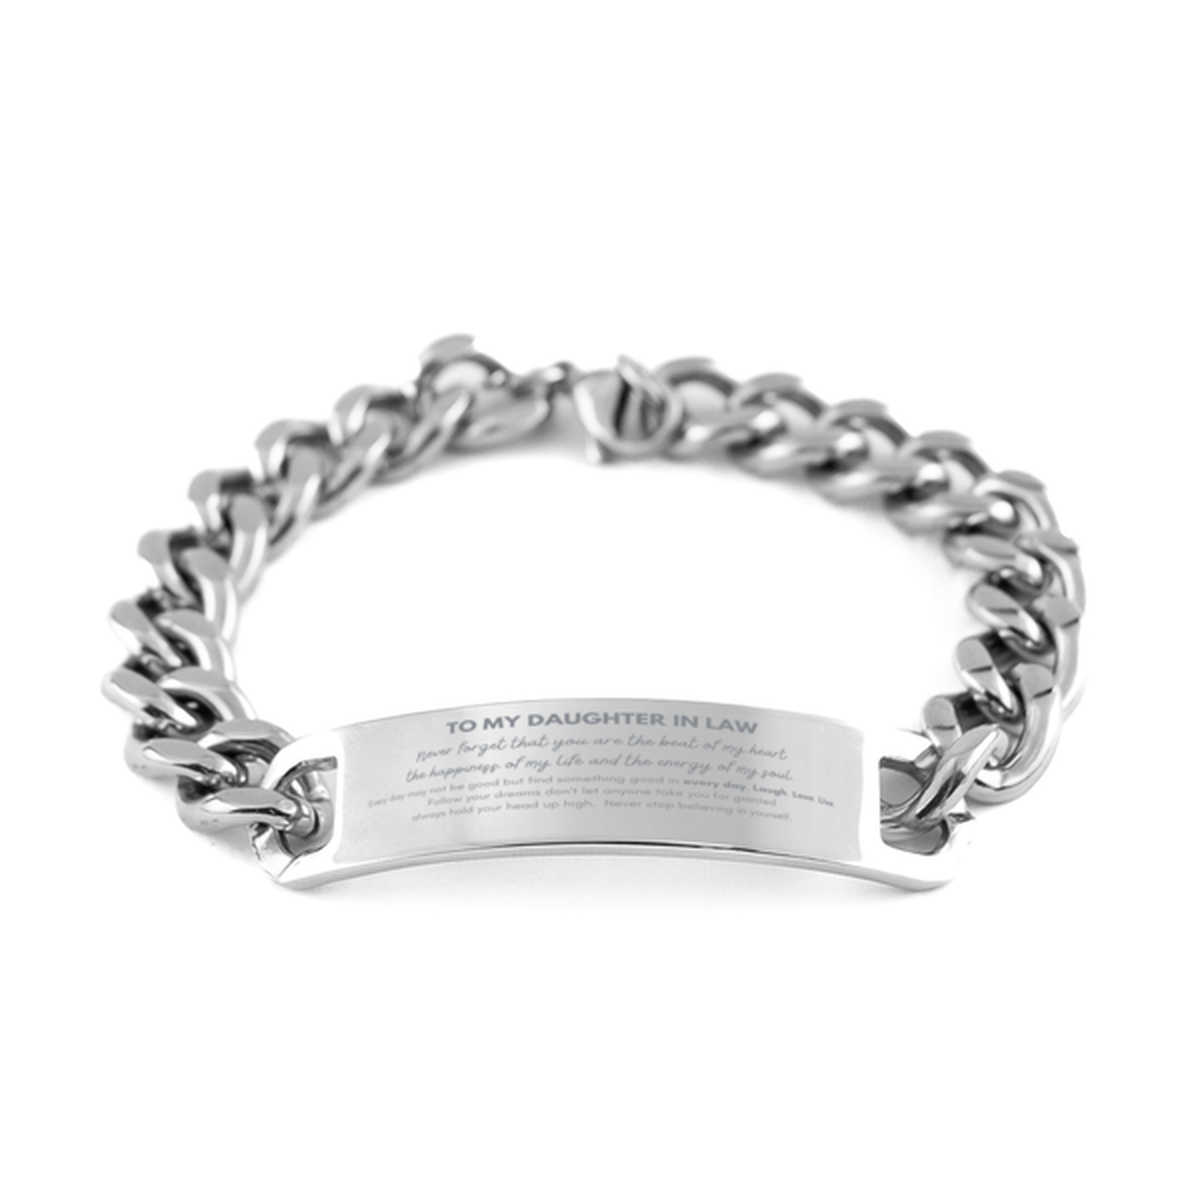 To My Daughter In Law Bracelet Gifts, Christmas Daughter In Law Cuban Chain Stainless Steel Bracelet Present, Birthday Unique Motivational For Daughter In Law, To My Daughter In Law Never forget that you are the beat of my heart the happiness of my life a